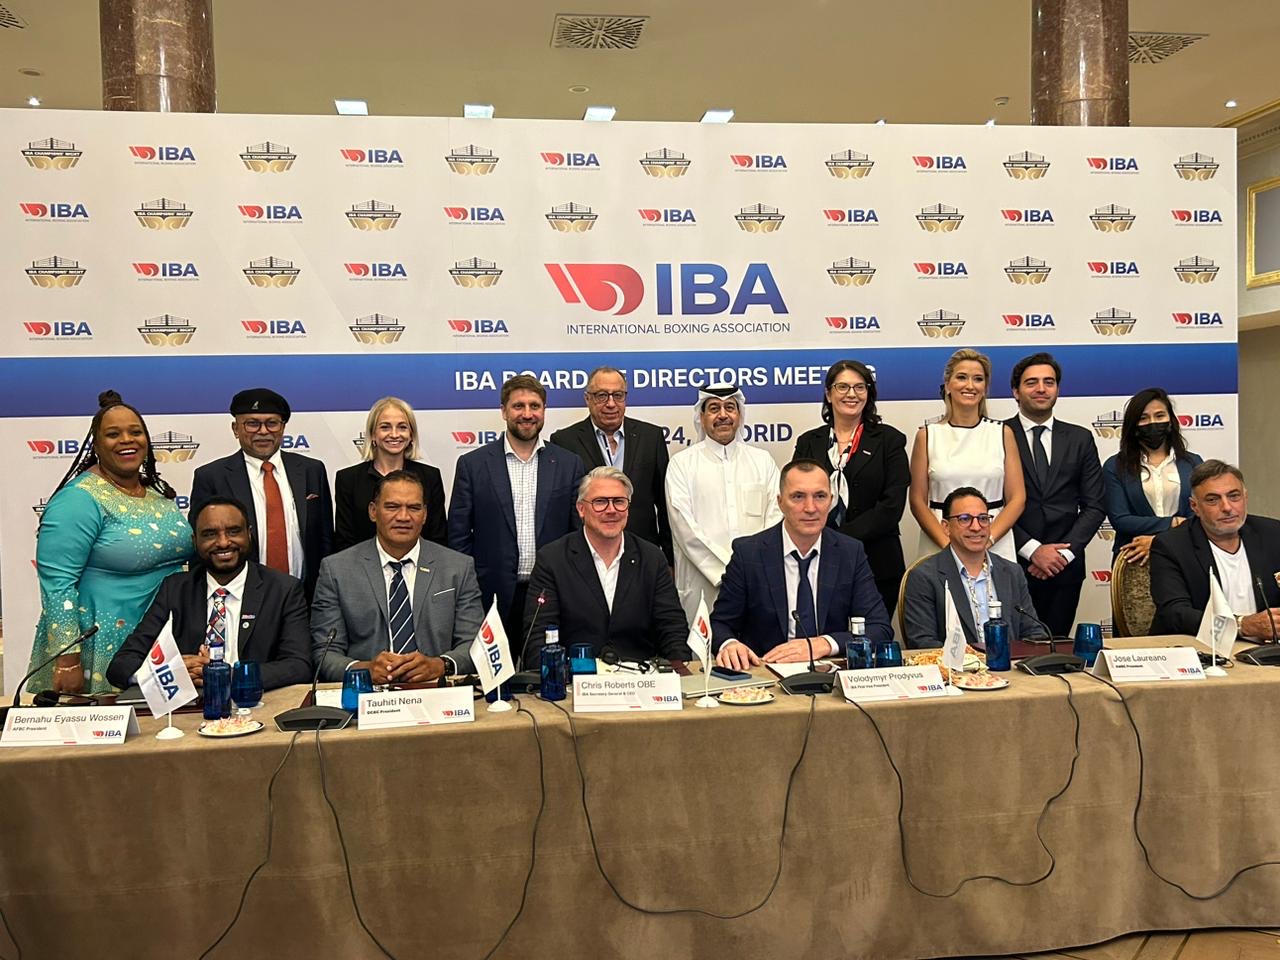 IBA Board of Directors in Madrid successfully concluded